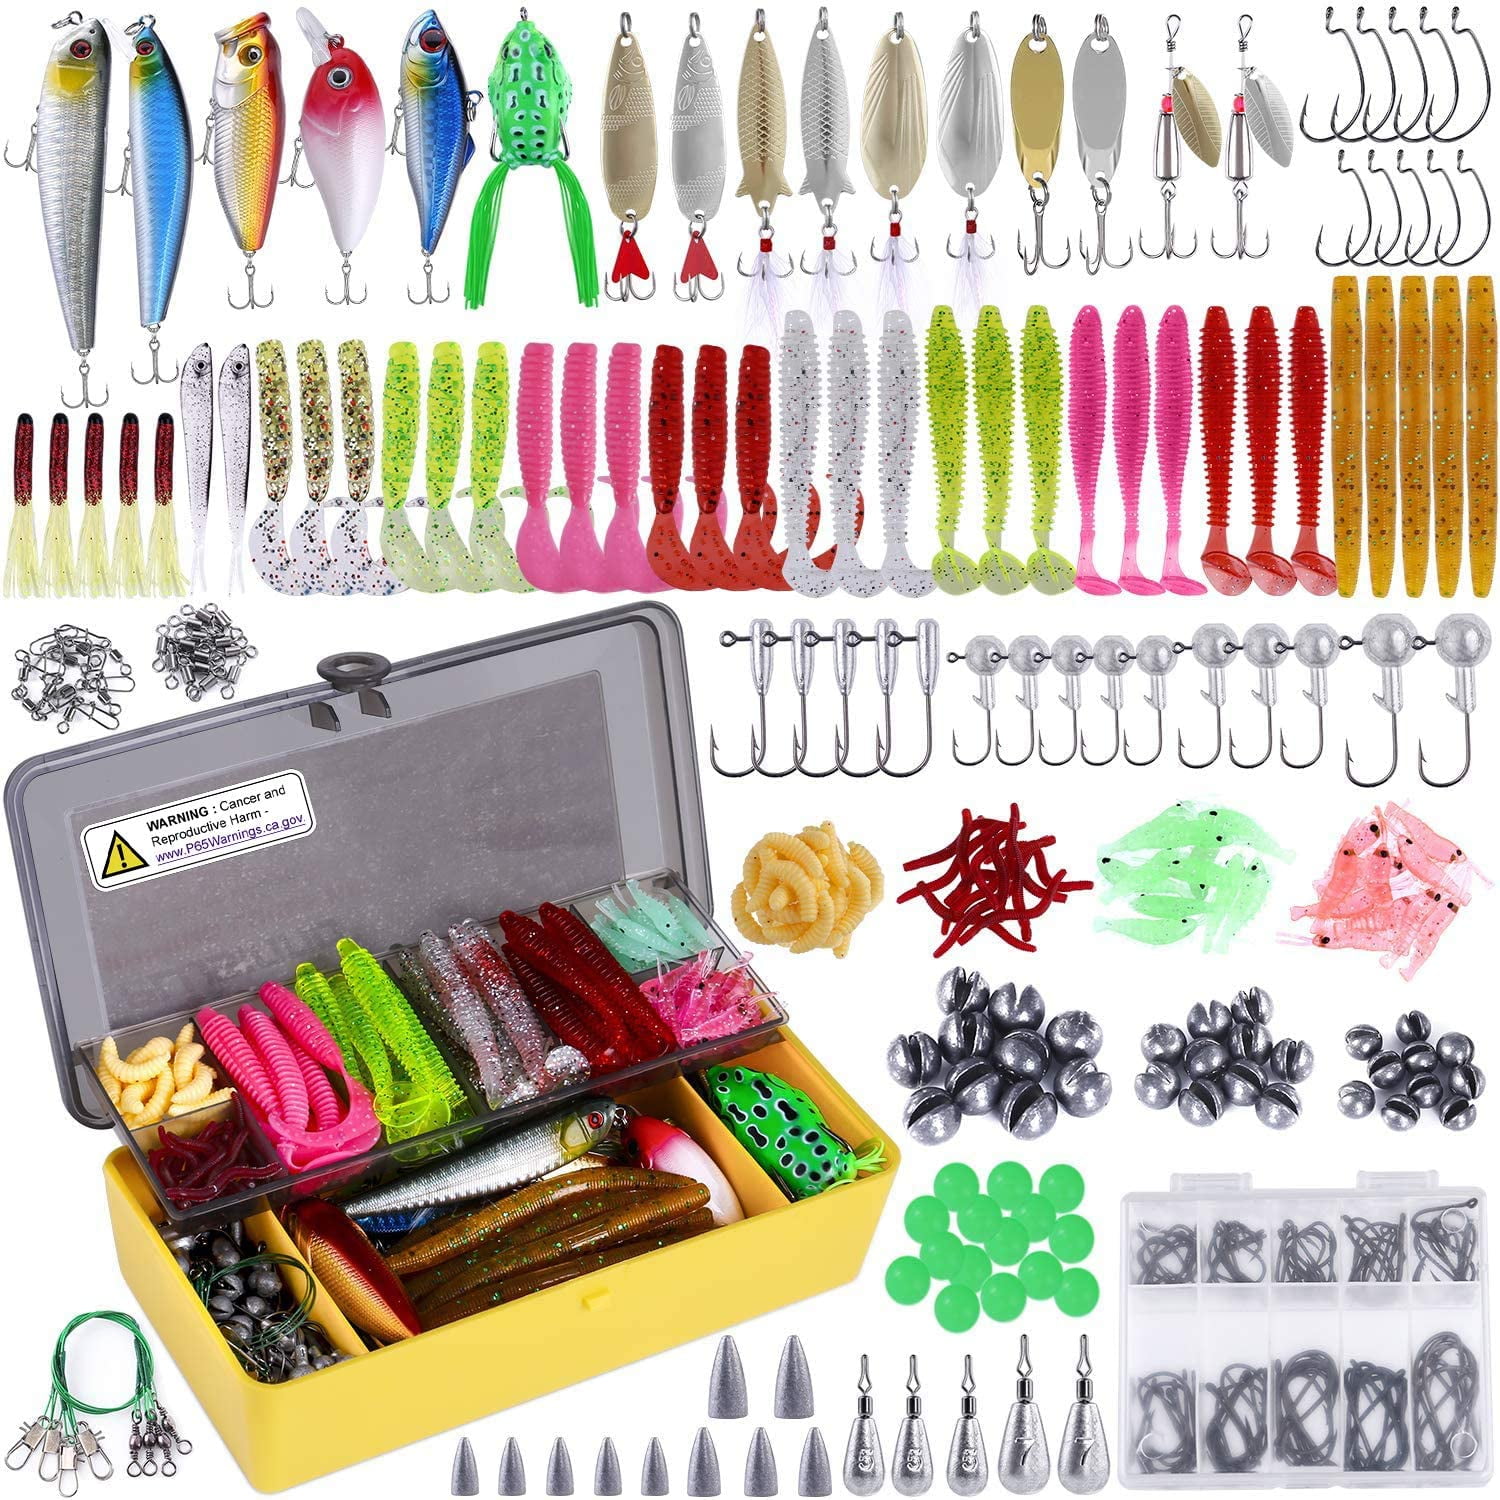 Plusinno 16pcs Fishing Lure Spinnerbait Kit With Portable Carry Bag Bass Trout S for sale online